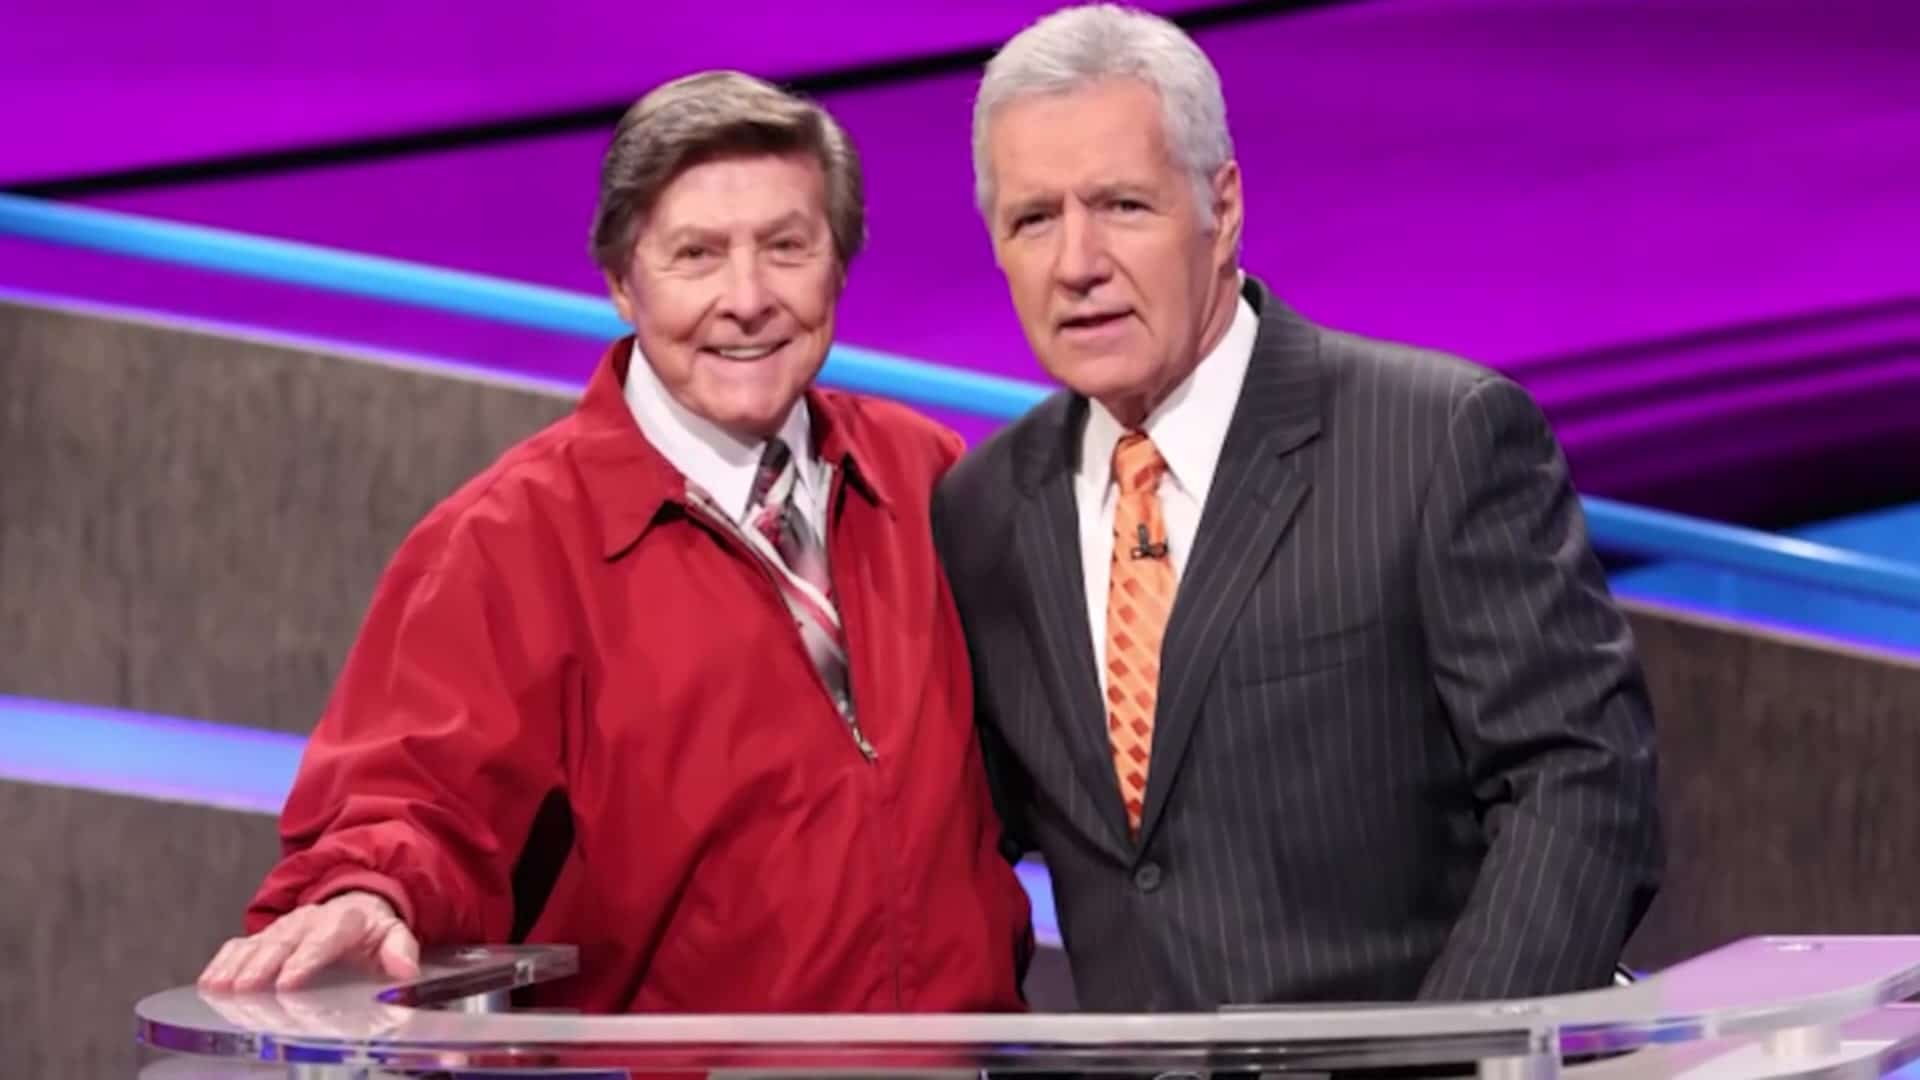 'Jeopardy!' Announcer Says The Whole Crew Is In 'A Fog' Following Alex Trebek's Death